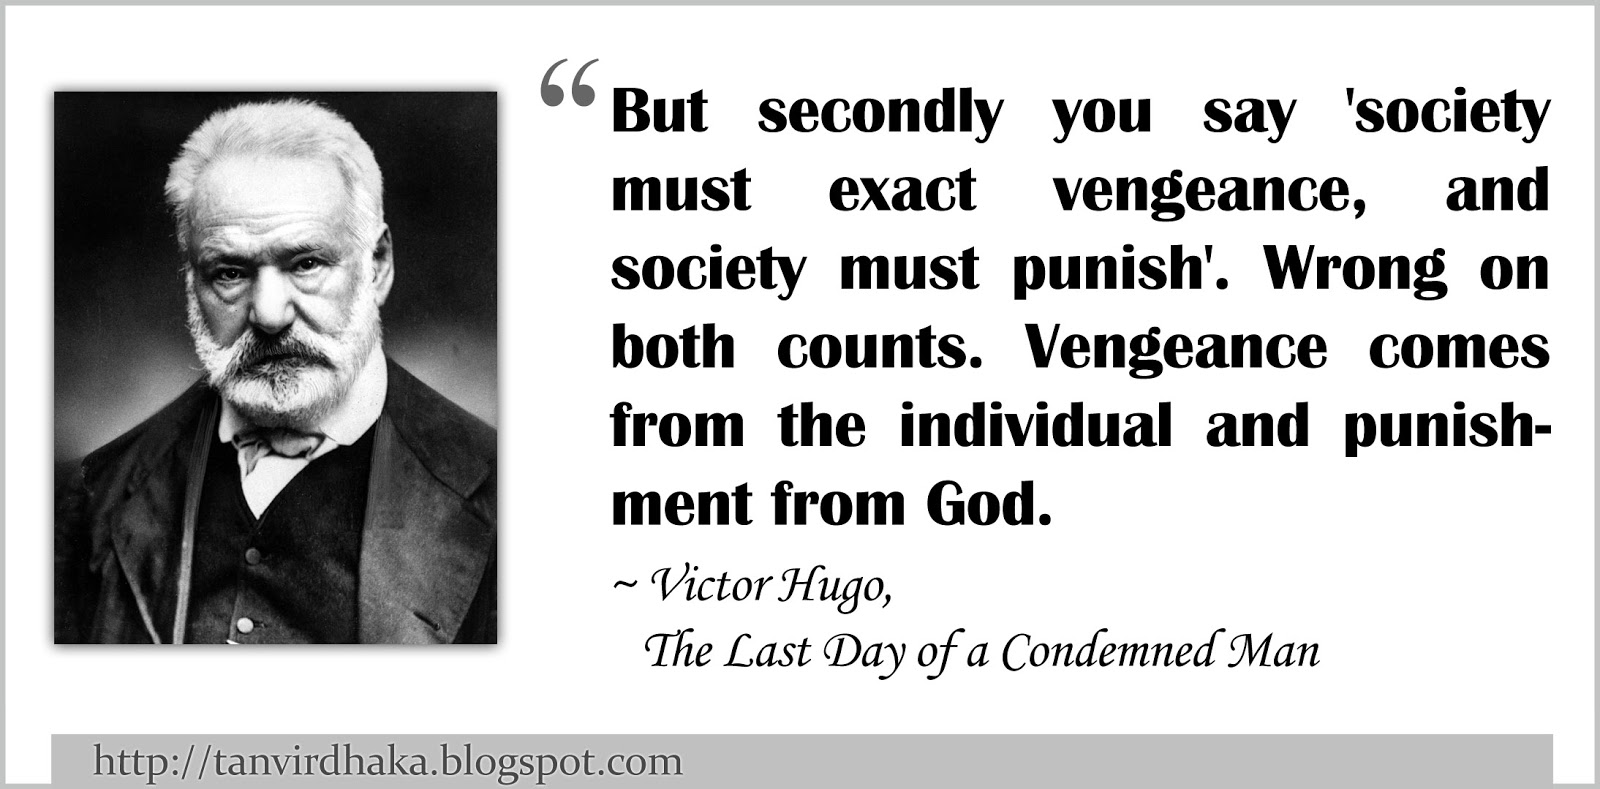 Quotations by Victor Hugo - Tanvir's Blog